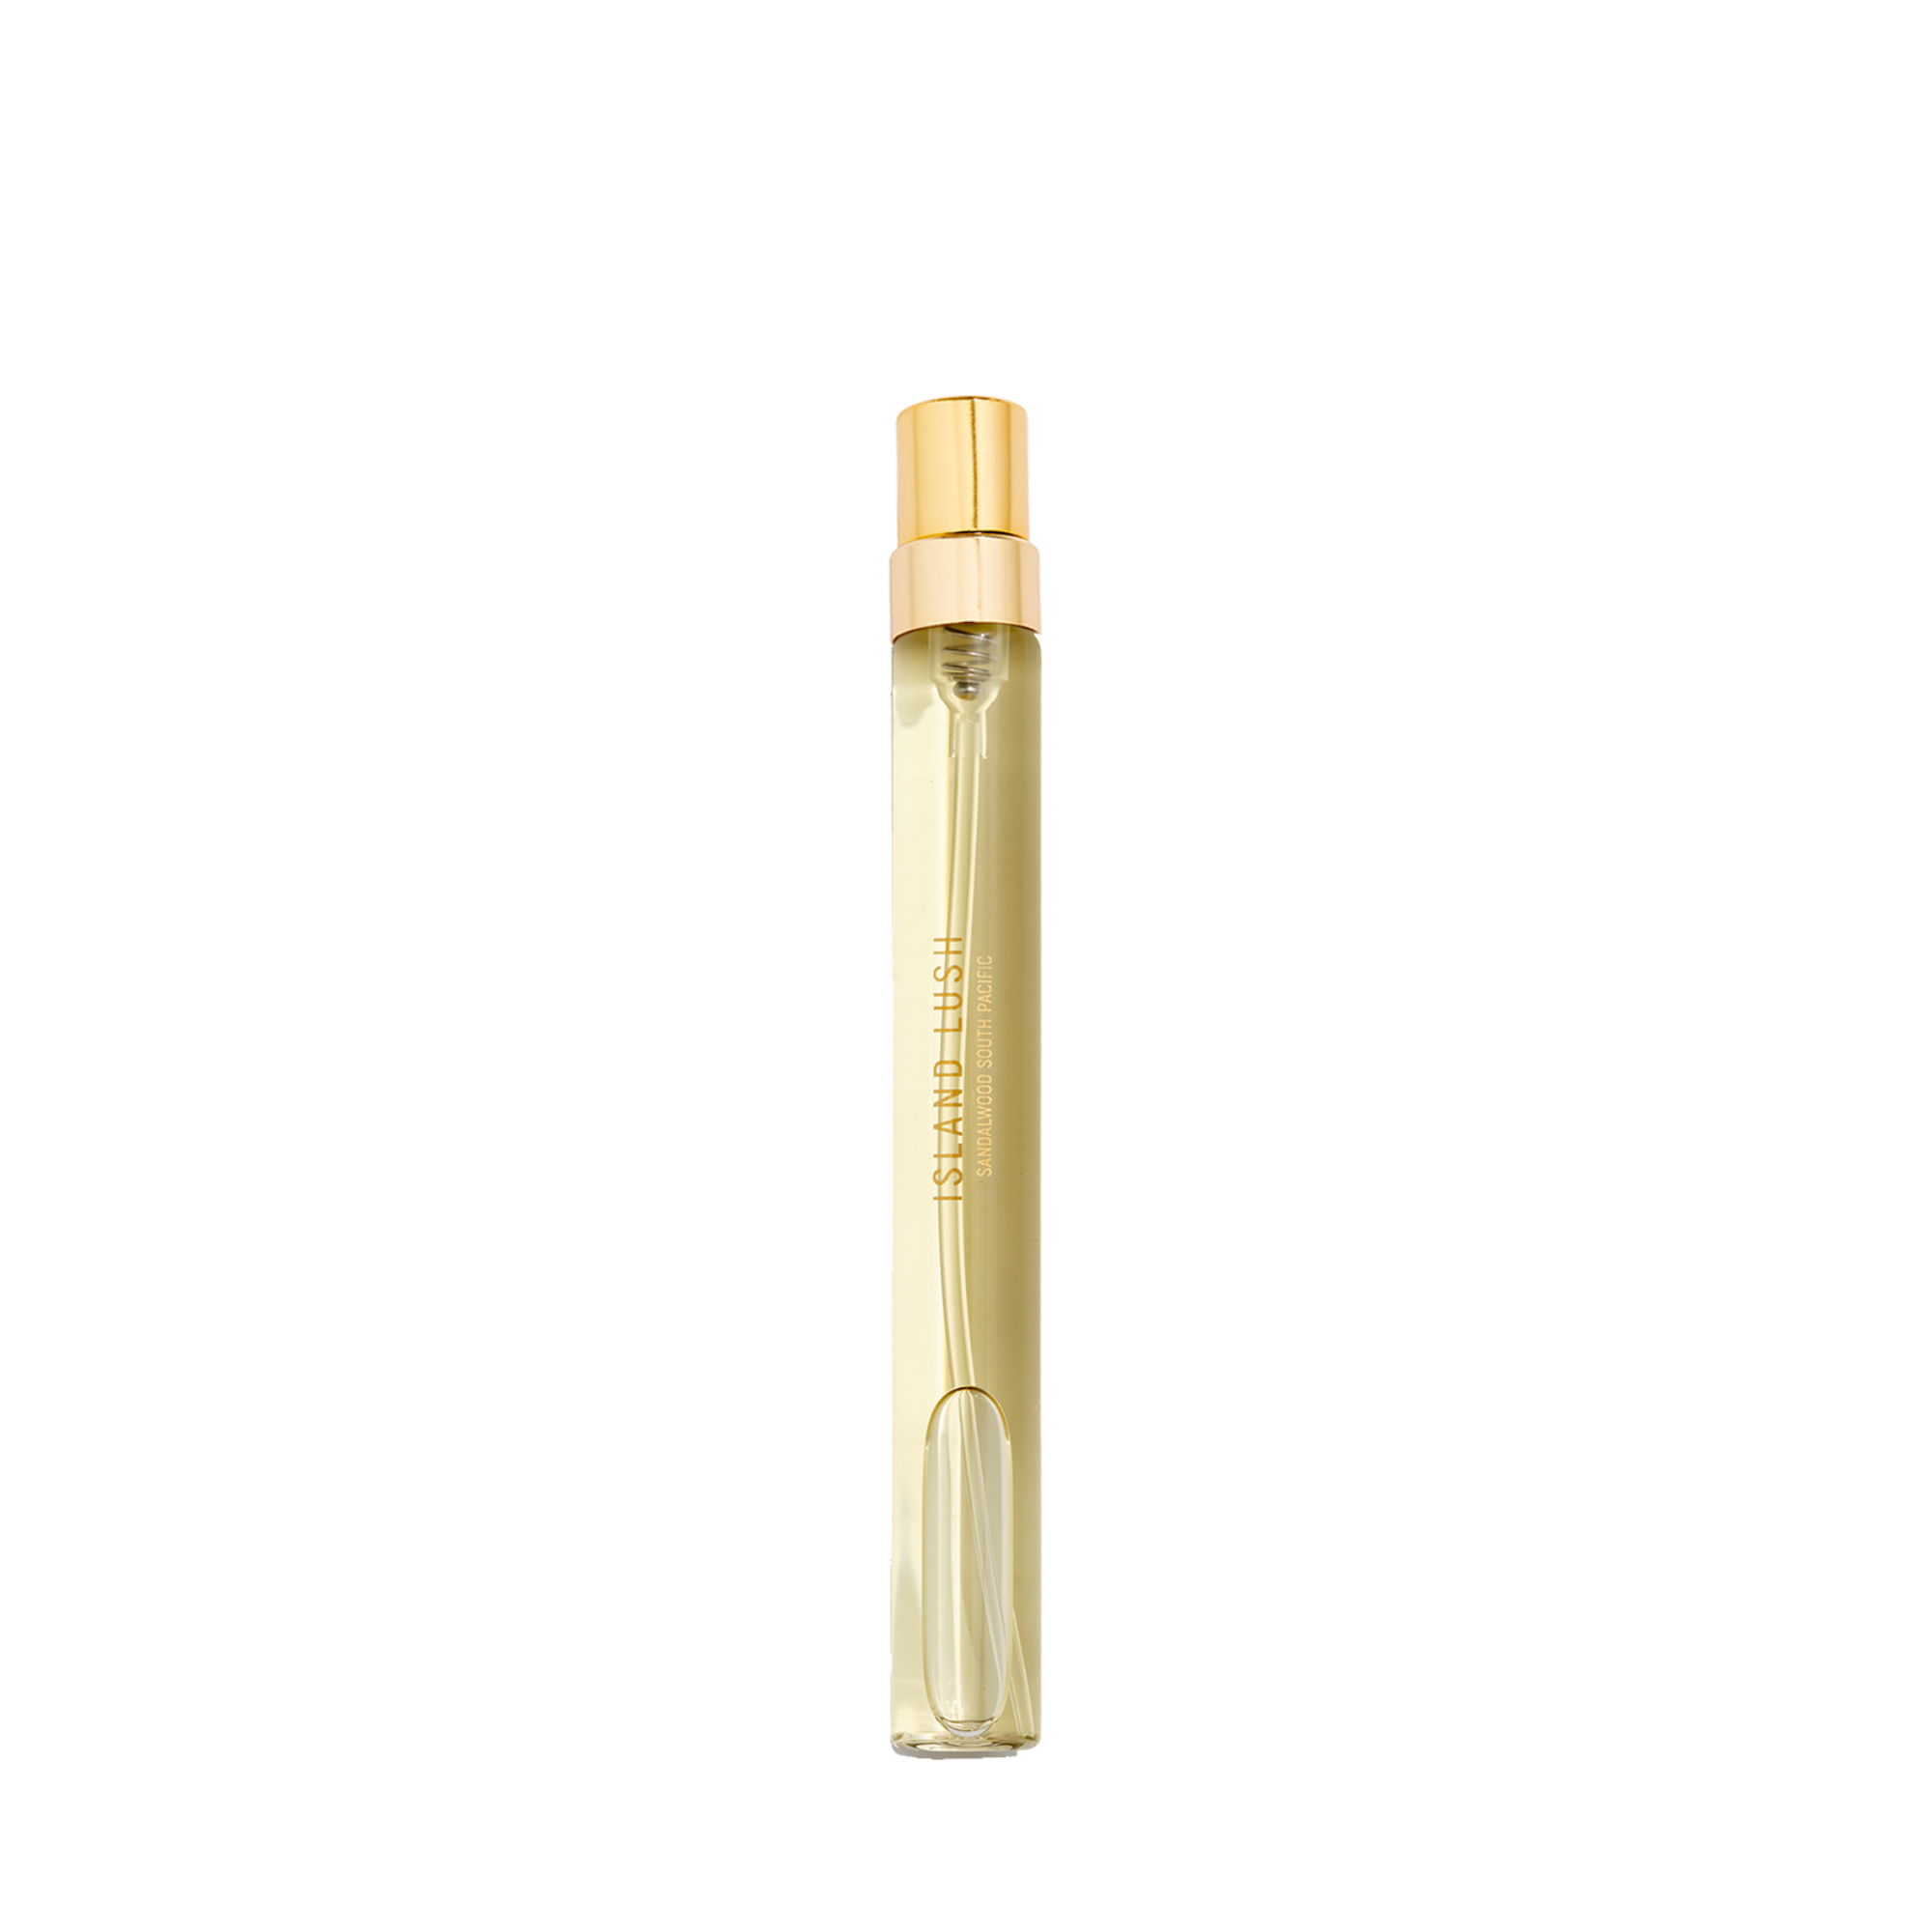 Island Lush Perfume Concentrate